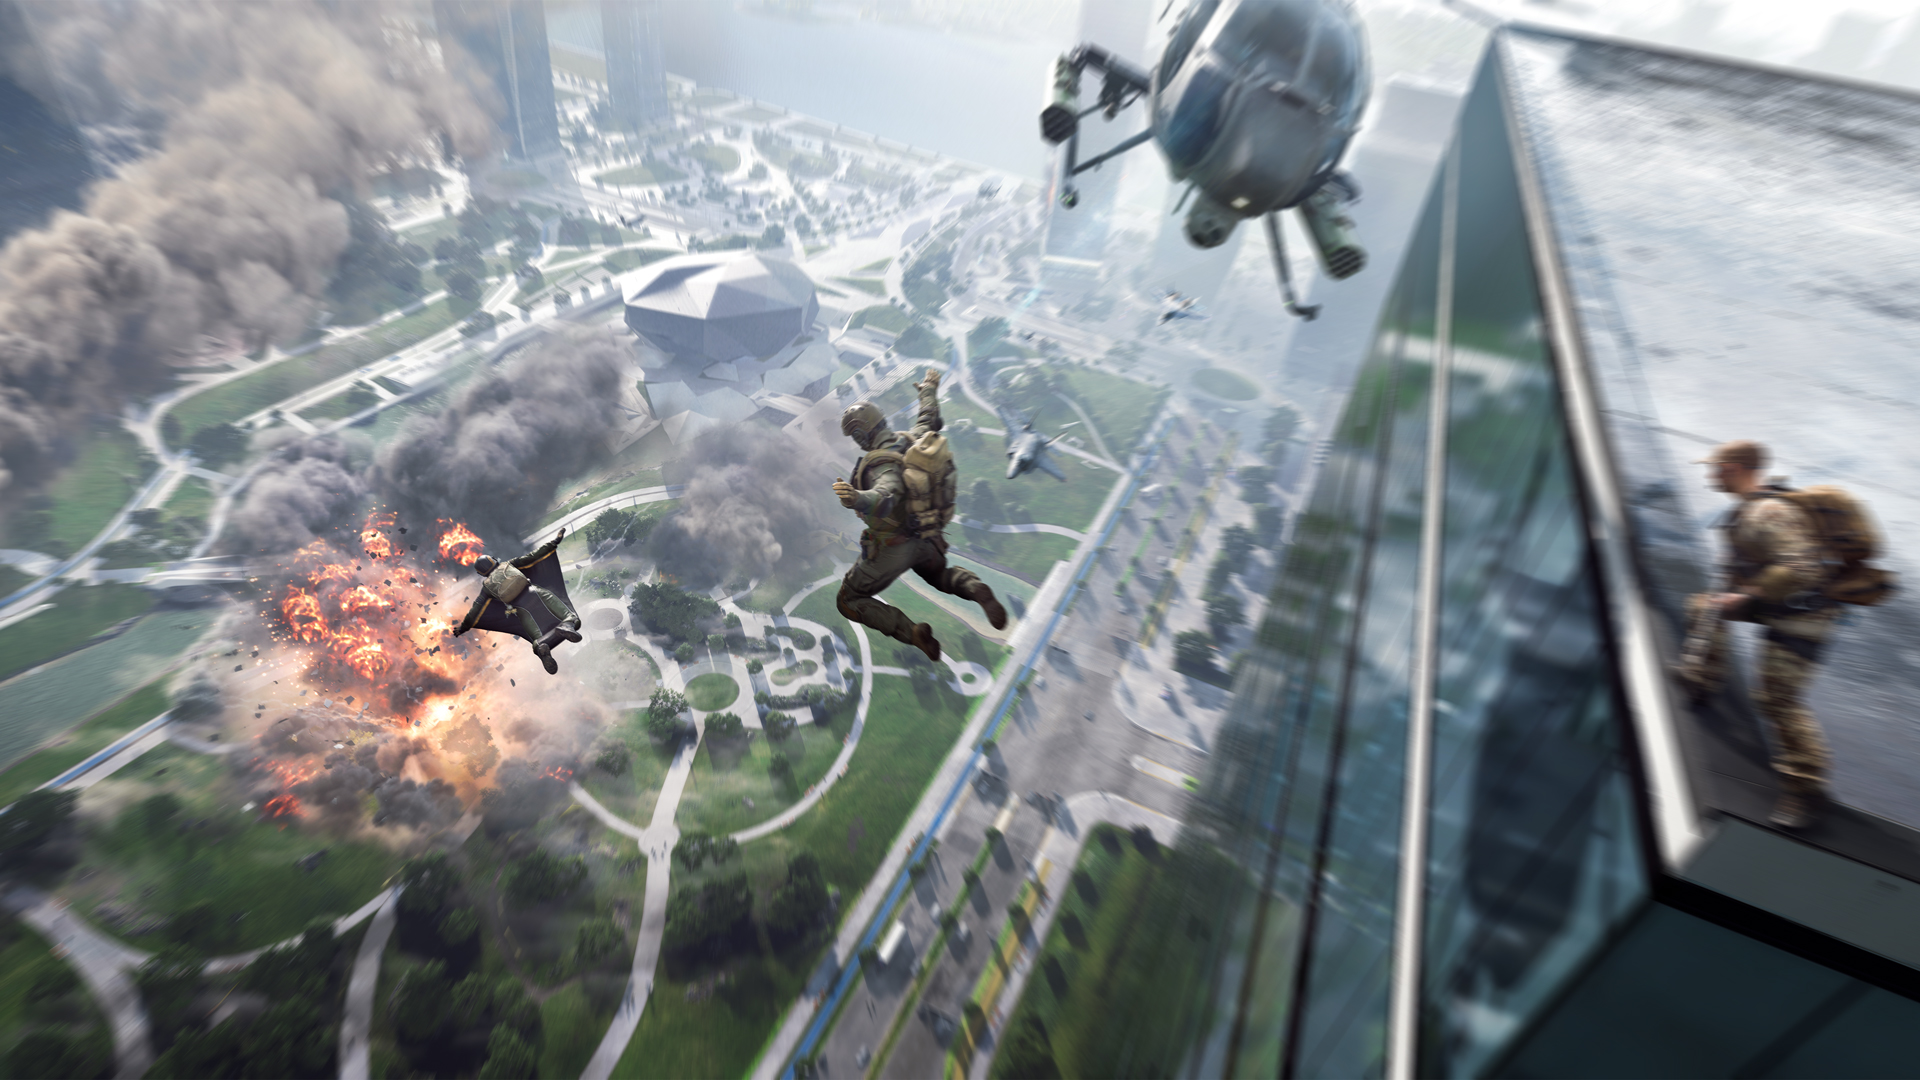 Battlefield 2042 review: "A good time that only gets better with friends" |  GamesRadar+